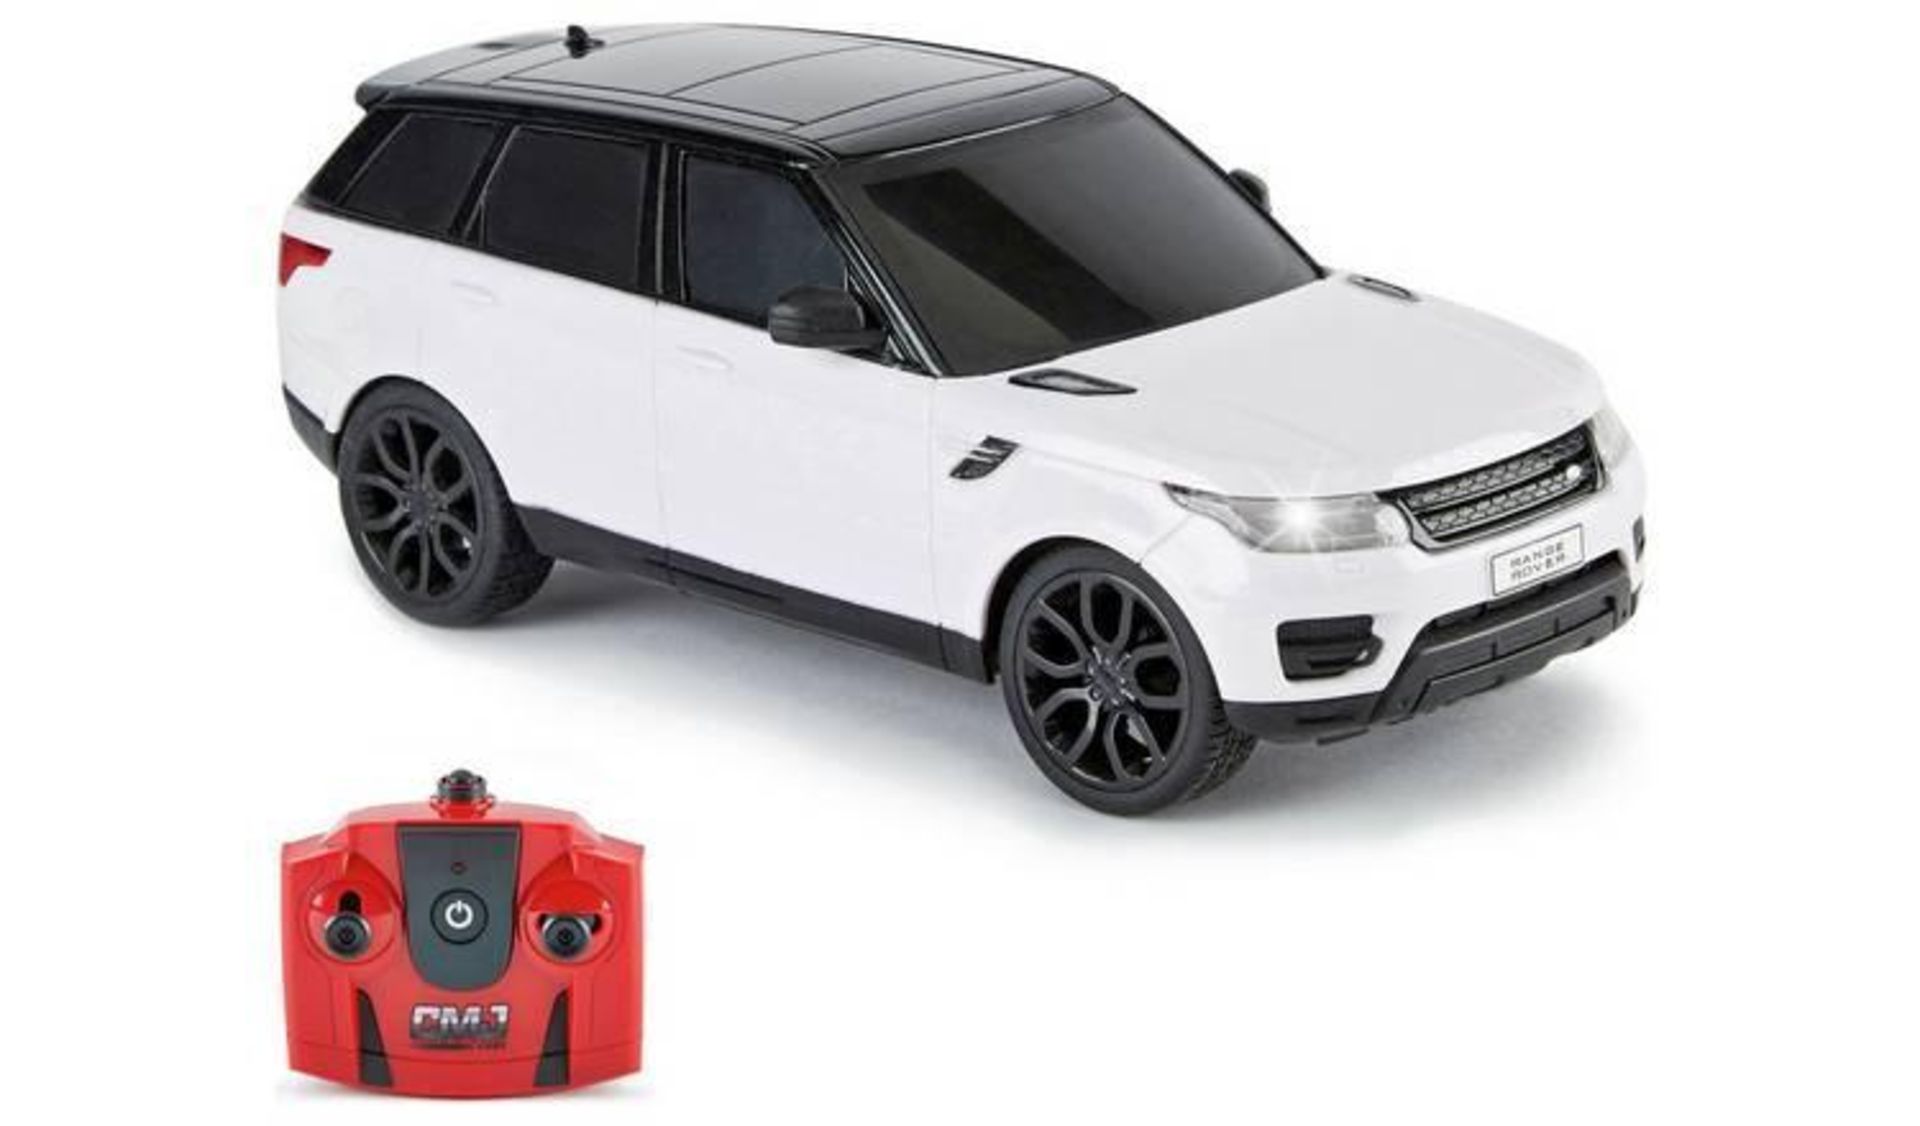 Radio Controlled Range Rover 1:24 Scale - White 2.4GHZ 886/3232 £11.00 RRP